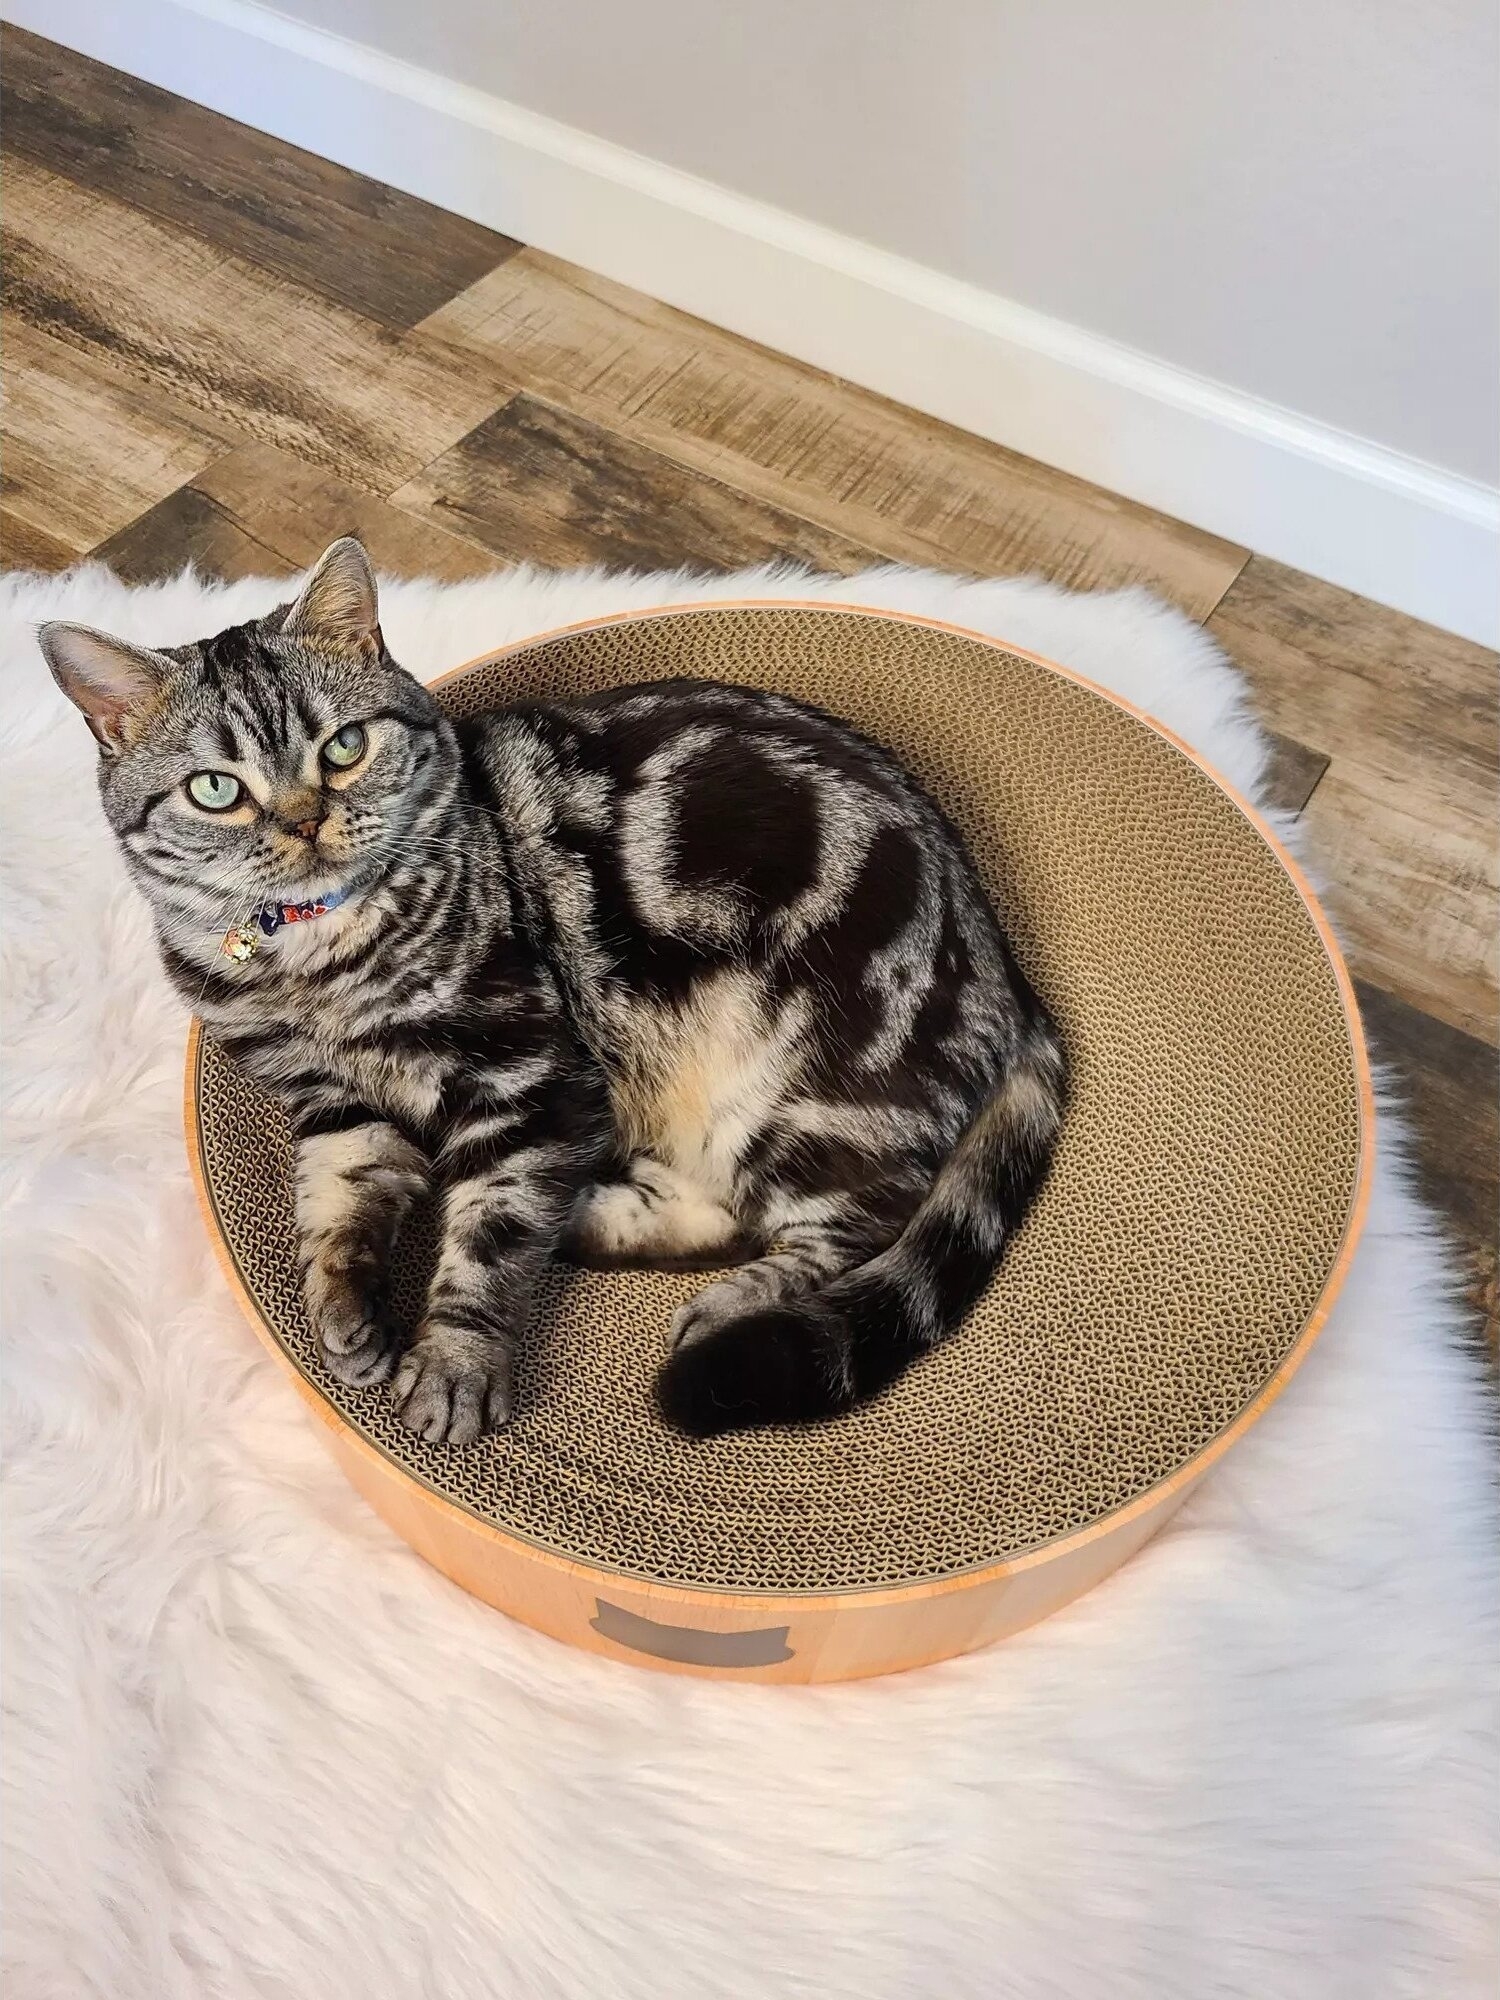 A cat lying in the circular shaped bed